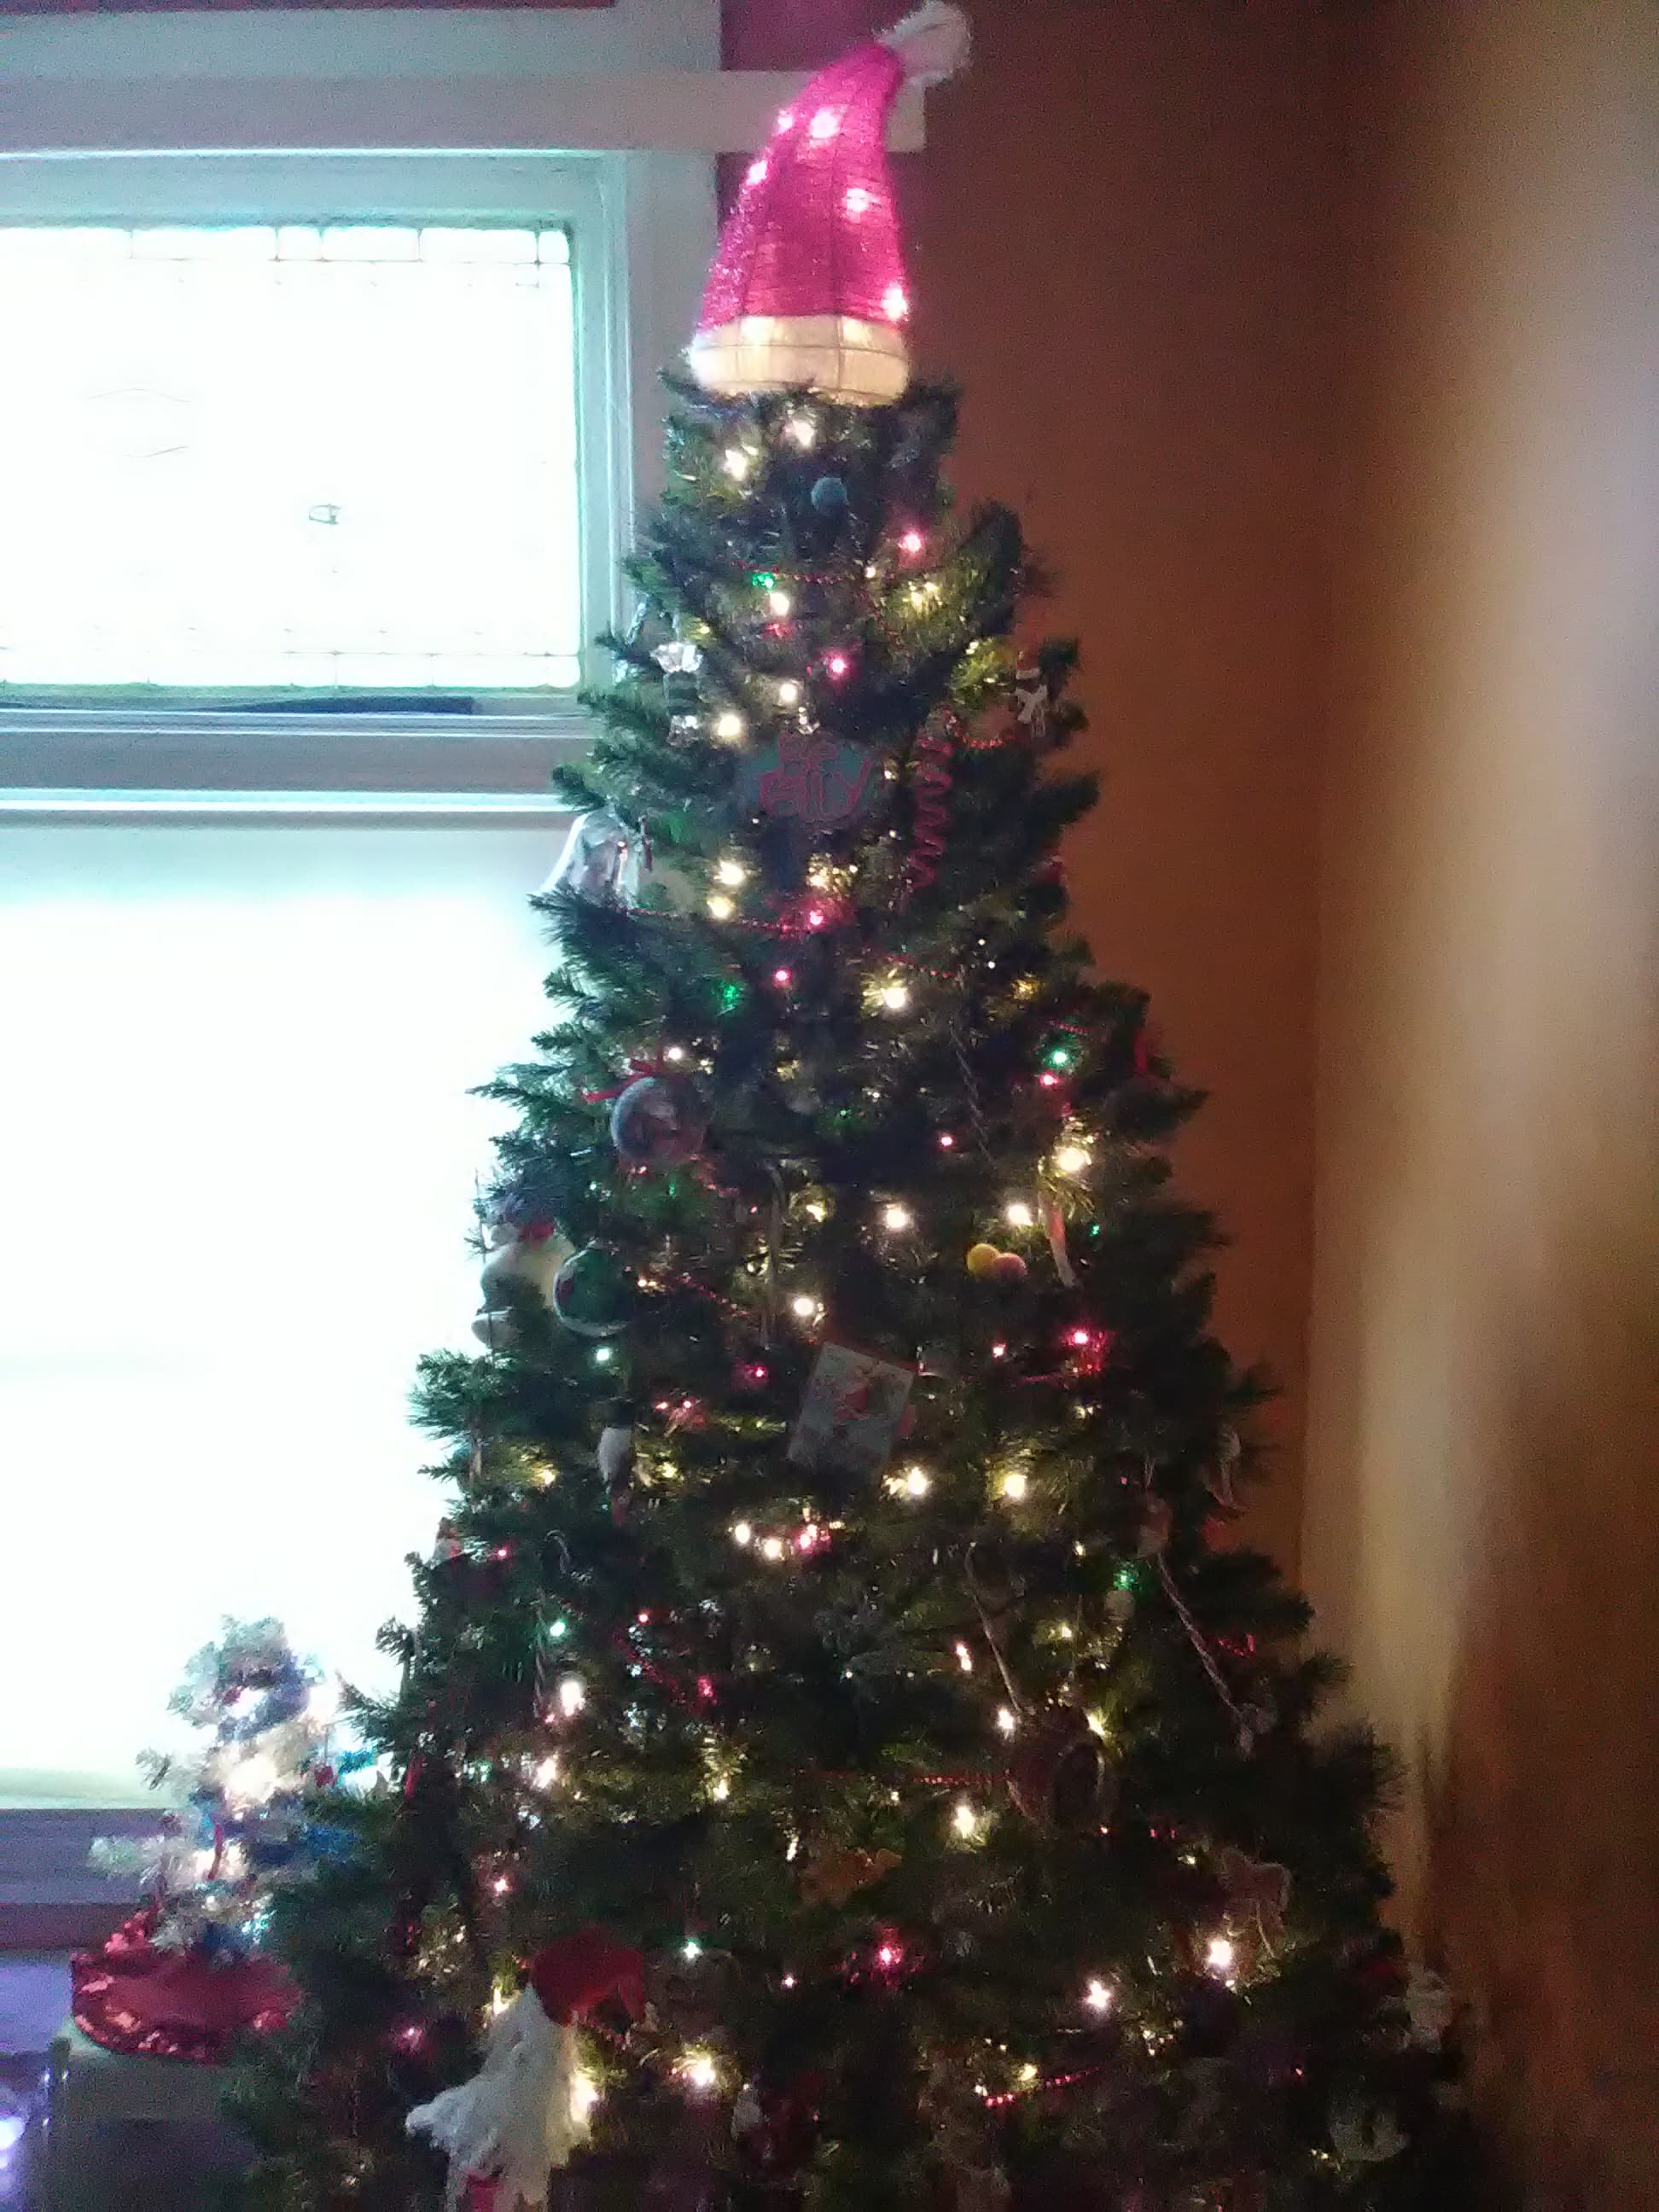 Photo Credit: I snapped and owned this photograph; it’s our Christmas tree this year.